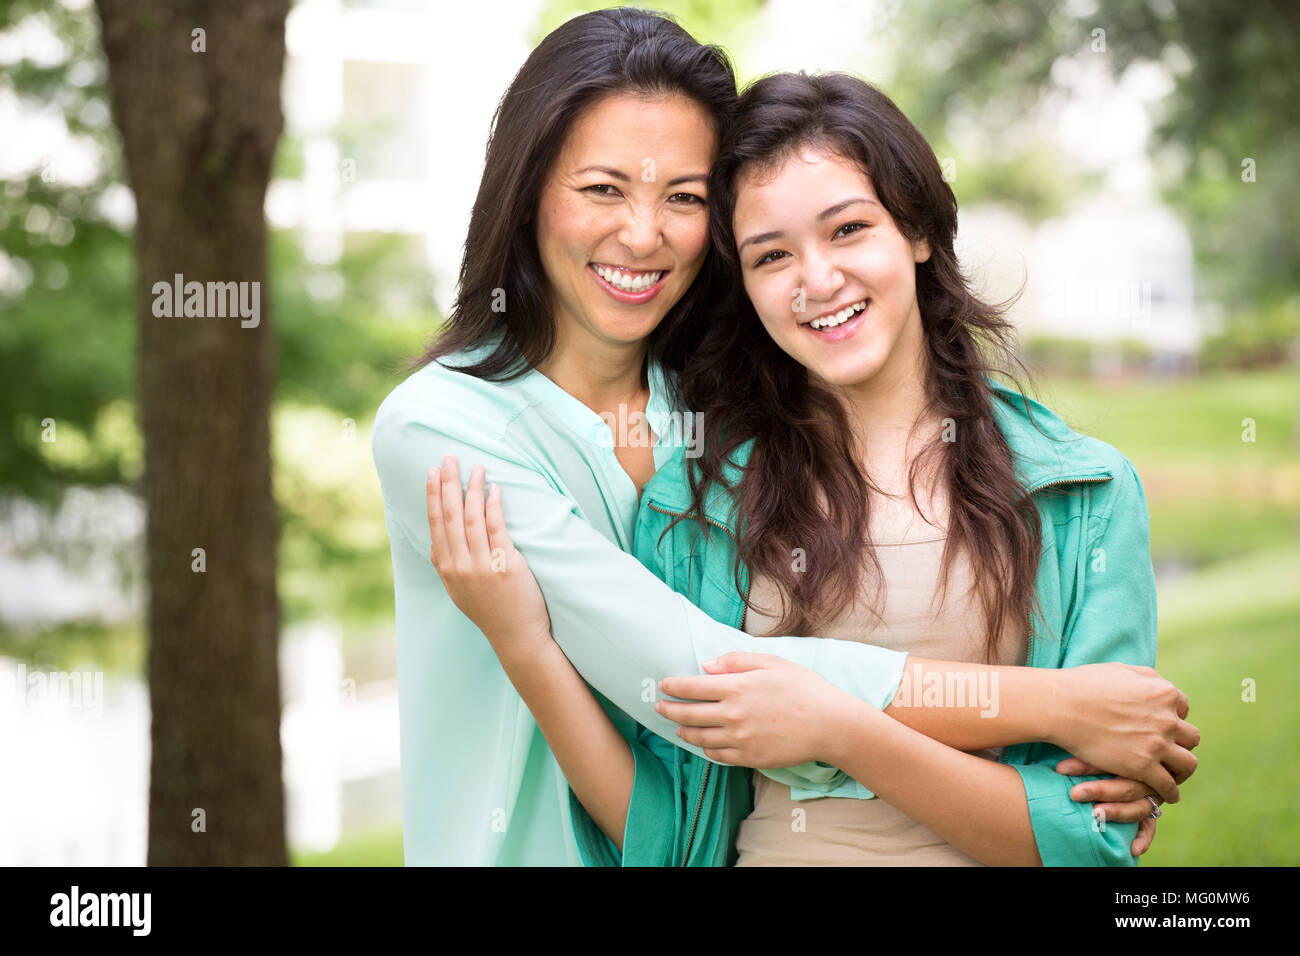 Asian mother laughing and huging her child. Stock Photo